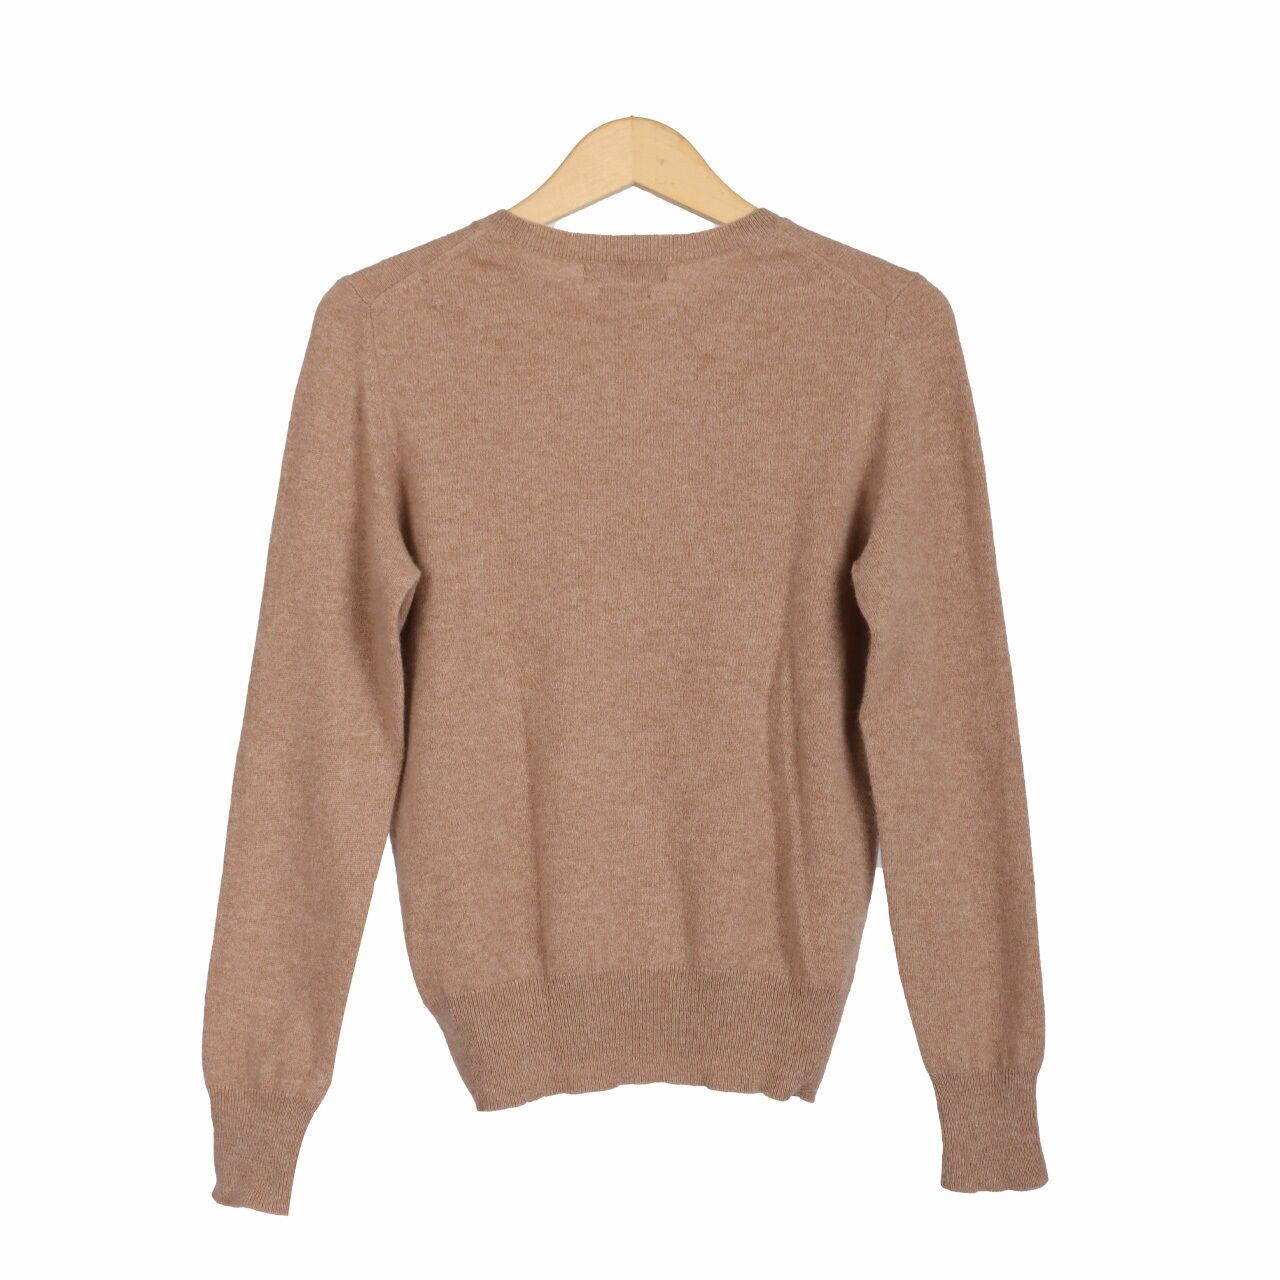 Autograph (Marks n Spencer) Camel Knit Sweater